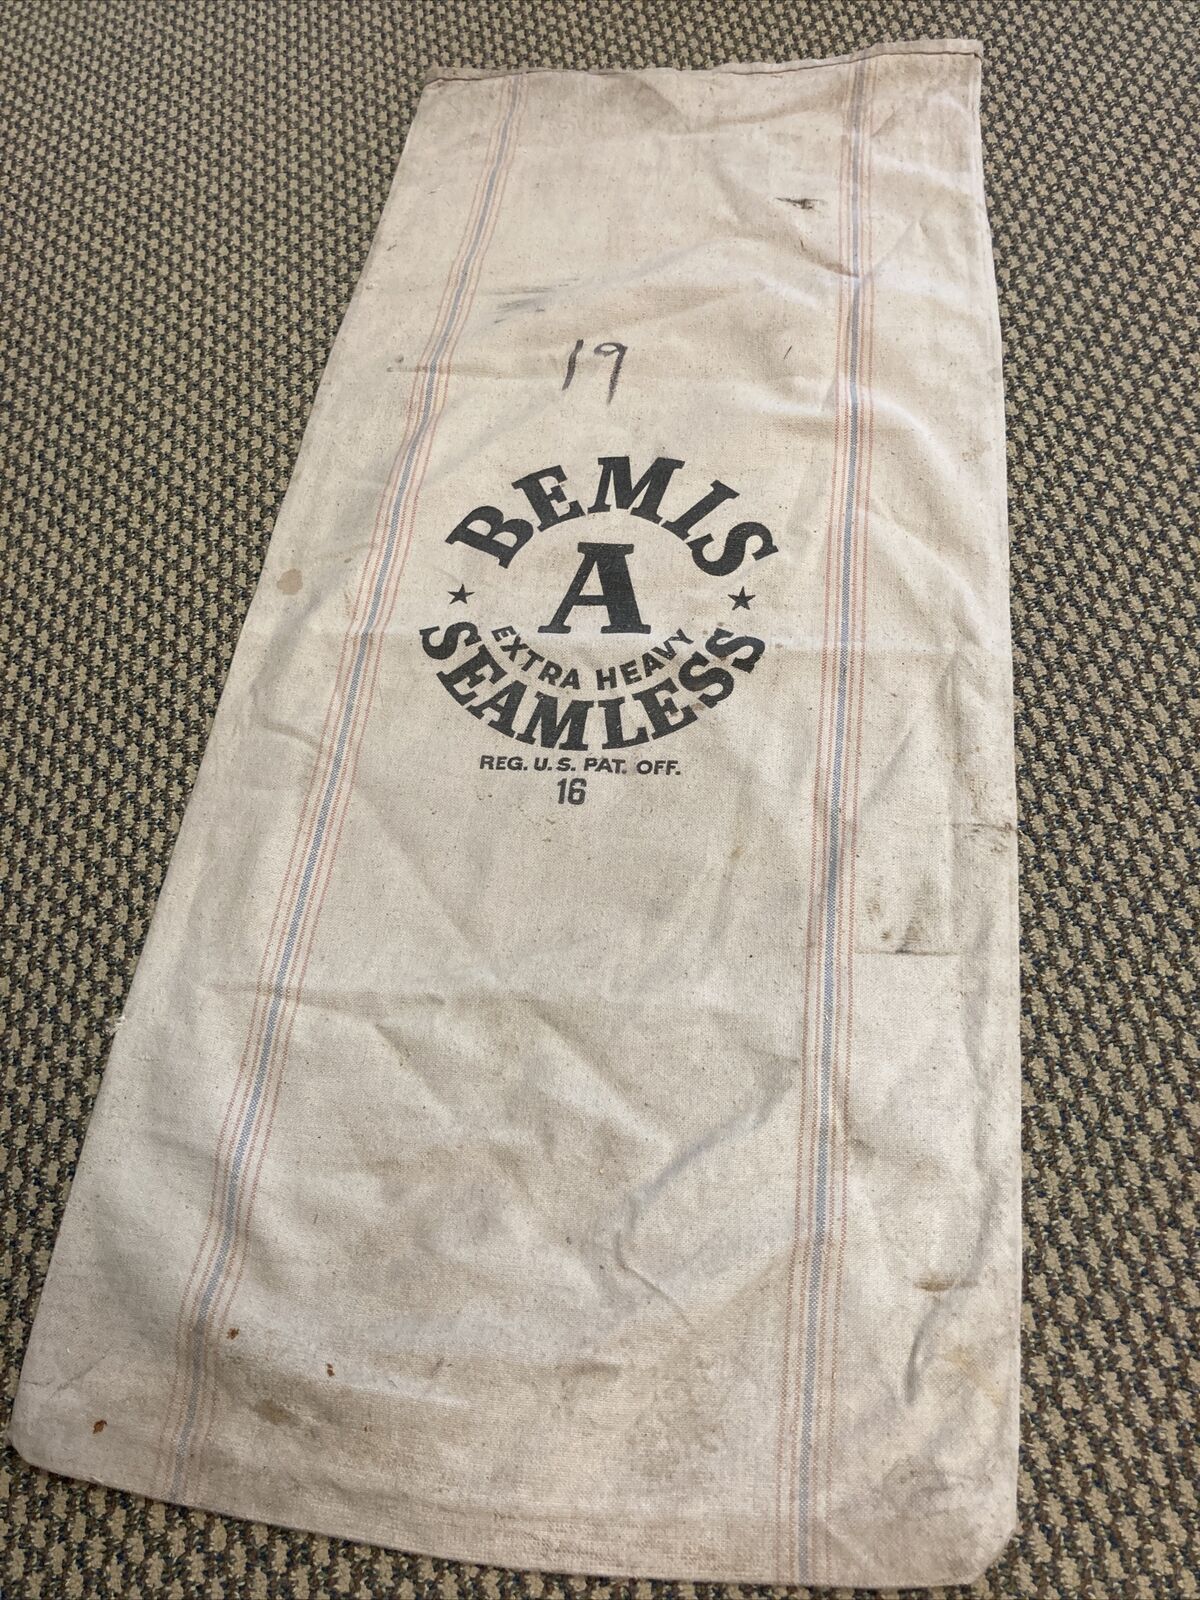 Vintage Bemis A Seamless Heavy Feed Seed Sack Cotton Size 44” X 20” Canvas